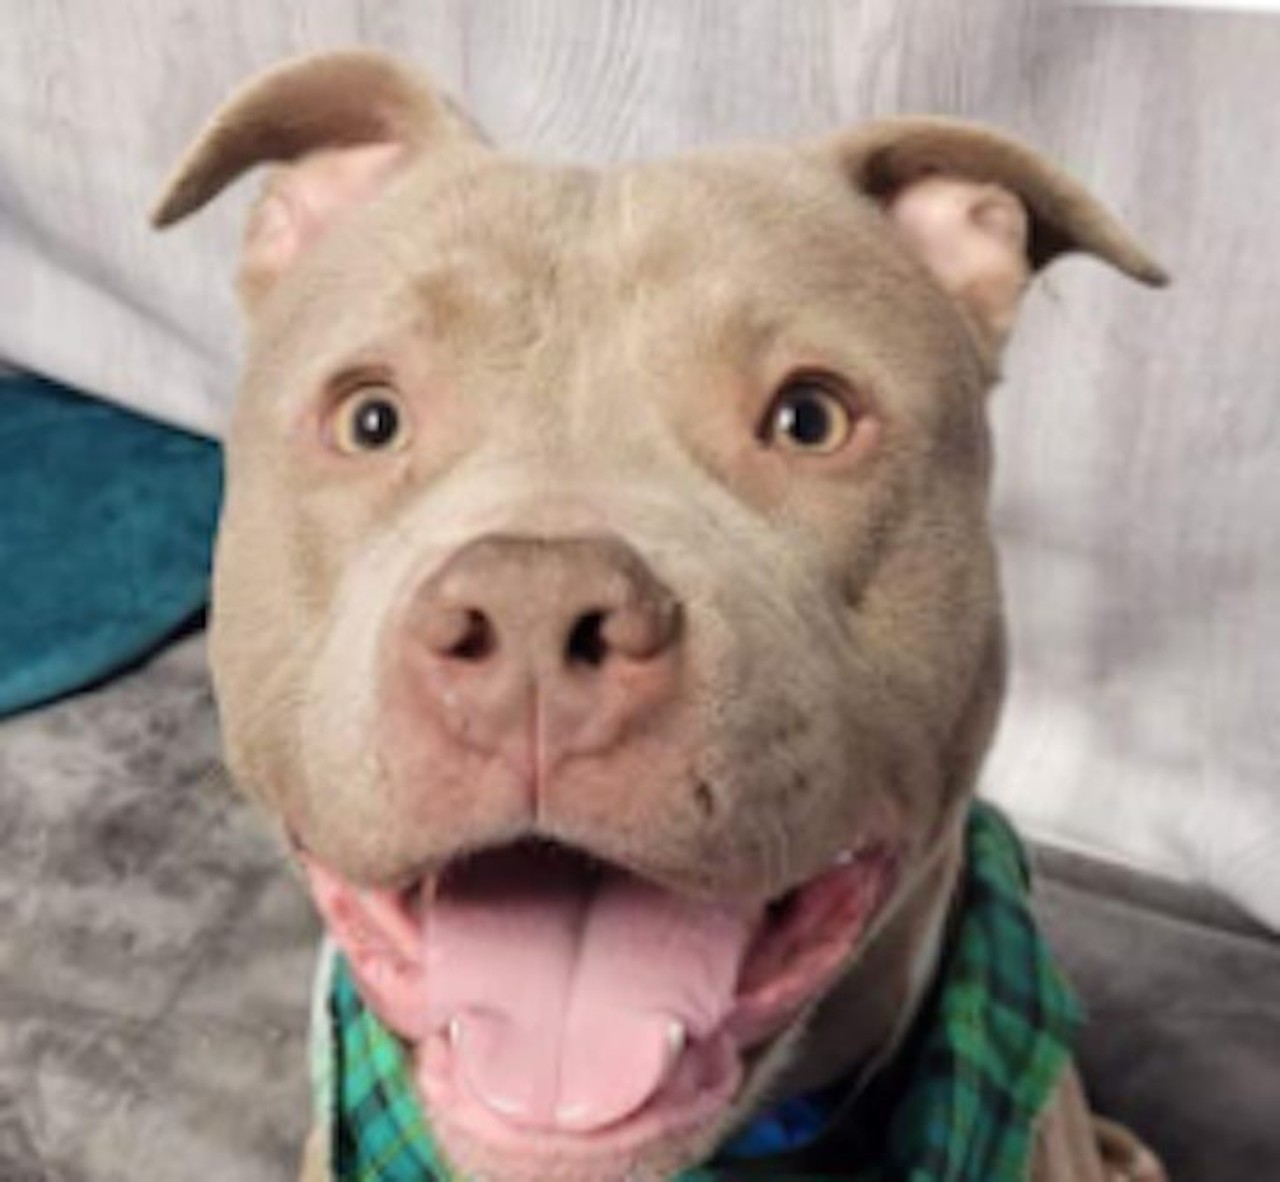 Rum
A146271 
57 lb. neutered male, approx. 1 1/2 yrs old. 
American Pit Bull Terrier 
He's very energetic, and playful. Still learning some manners, but he is young. 
He&#146;s always smiling and happy. What a cutie! 
Unknown behavior with cats/kids 
Dog Reactive